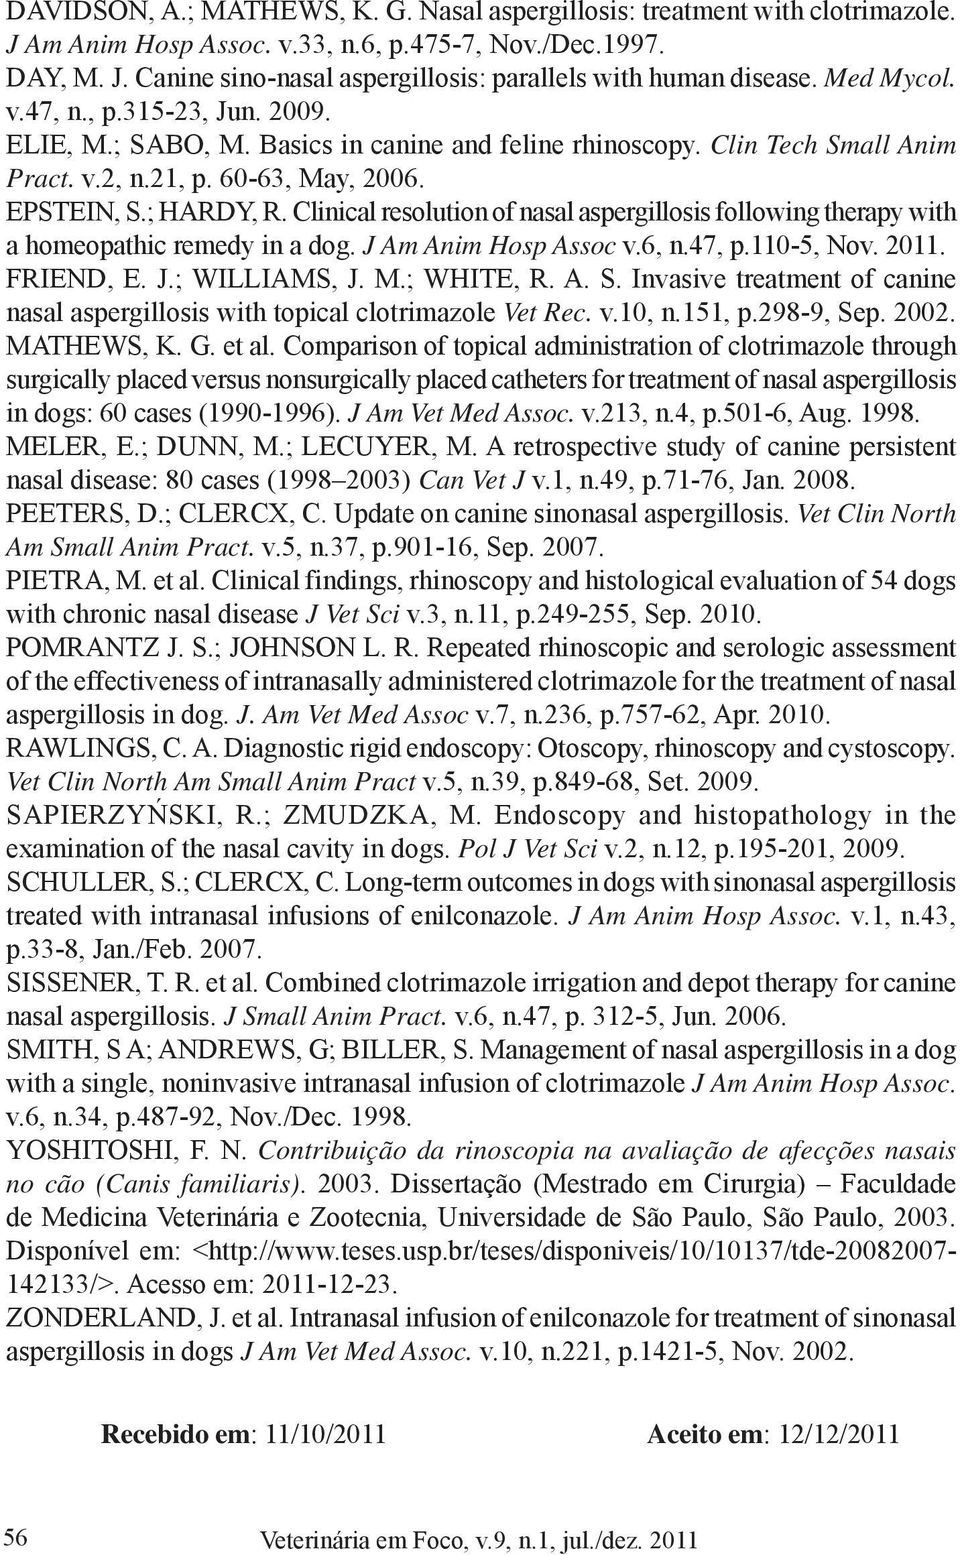 Clinical resolution of nasal aspergillosis following therapy with a homeopathic remedy in a dog. J Am Anim Hosp Assoc v.6, n.47, p.110-5, Nov. 2011. FRIEND, E. J.; WILLIAMS, J. M.; WHITE, R. A. S.